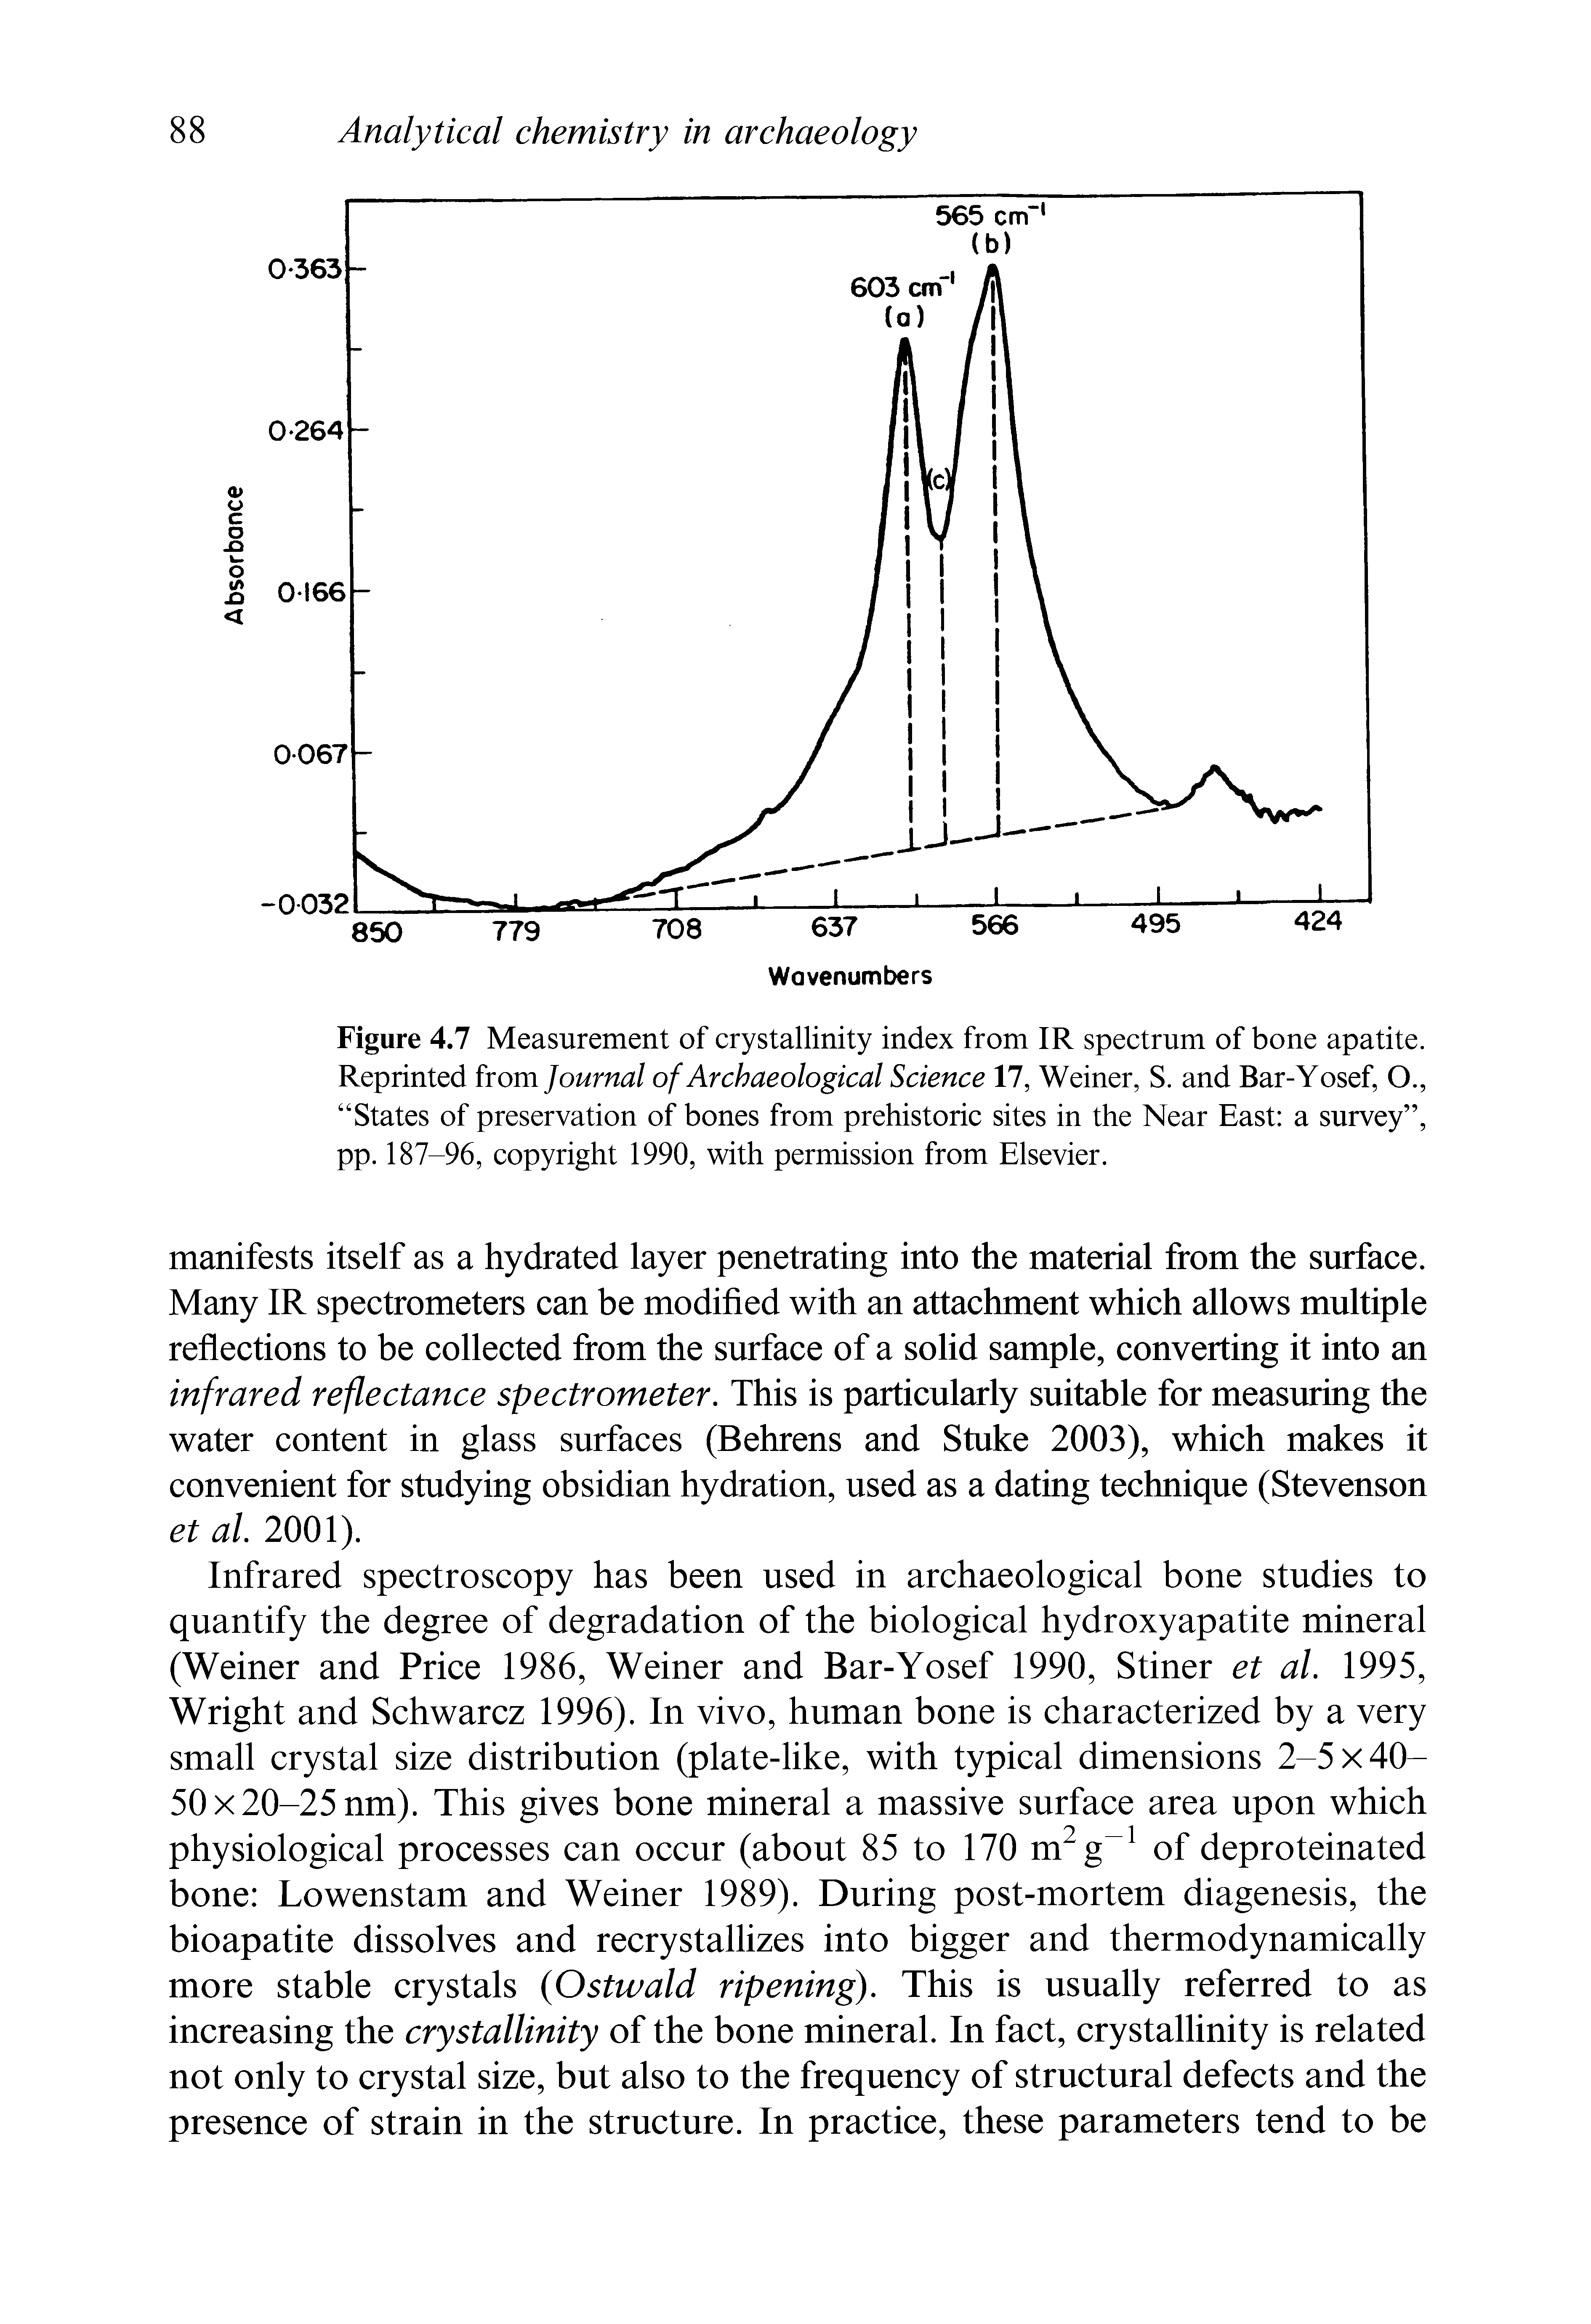 Figure 4.7 Measurement of crystallinity index from IR spectrum of bone apatite. Reprinted from Journal of Archaeological Science 17, Weiner, S. and Bar-Yosef, O., States of preservation of bones from prehistoric sites in the Near East a survey , pp. 187-96, copyright 1990, with permission from Elsevier.